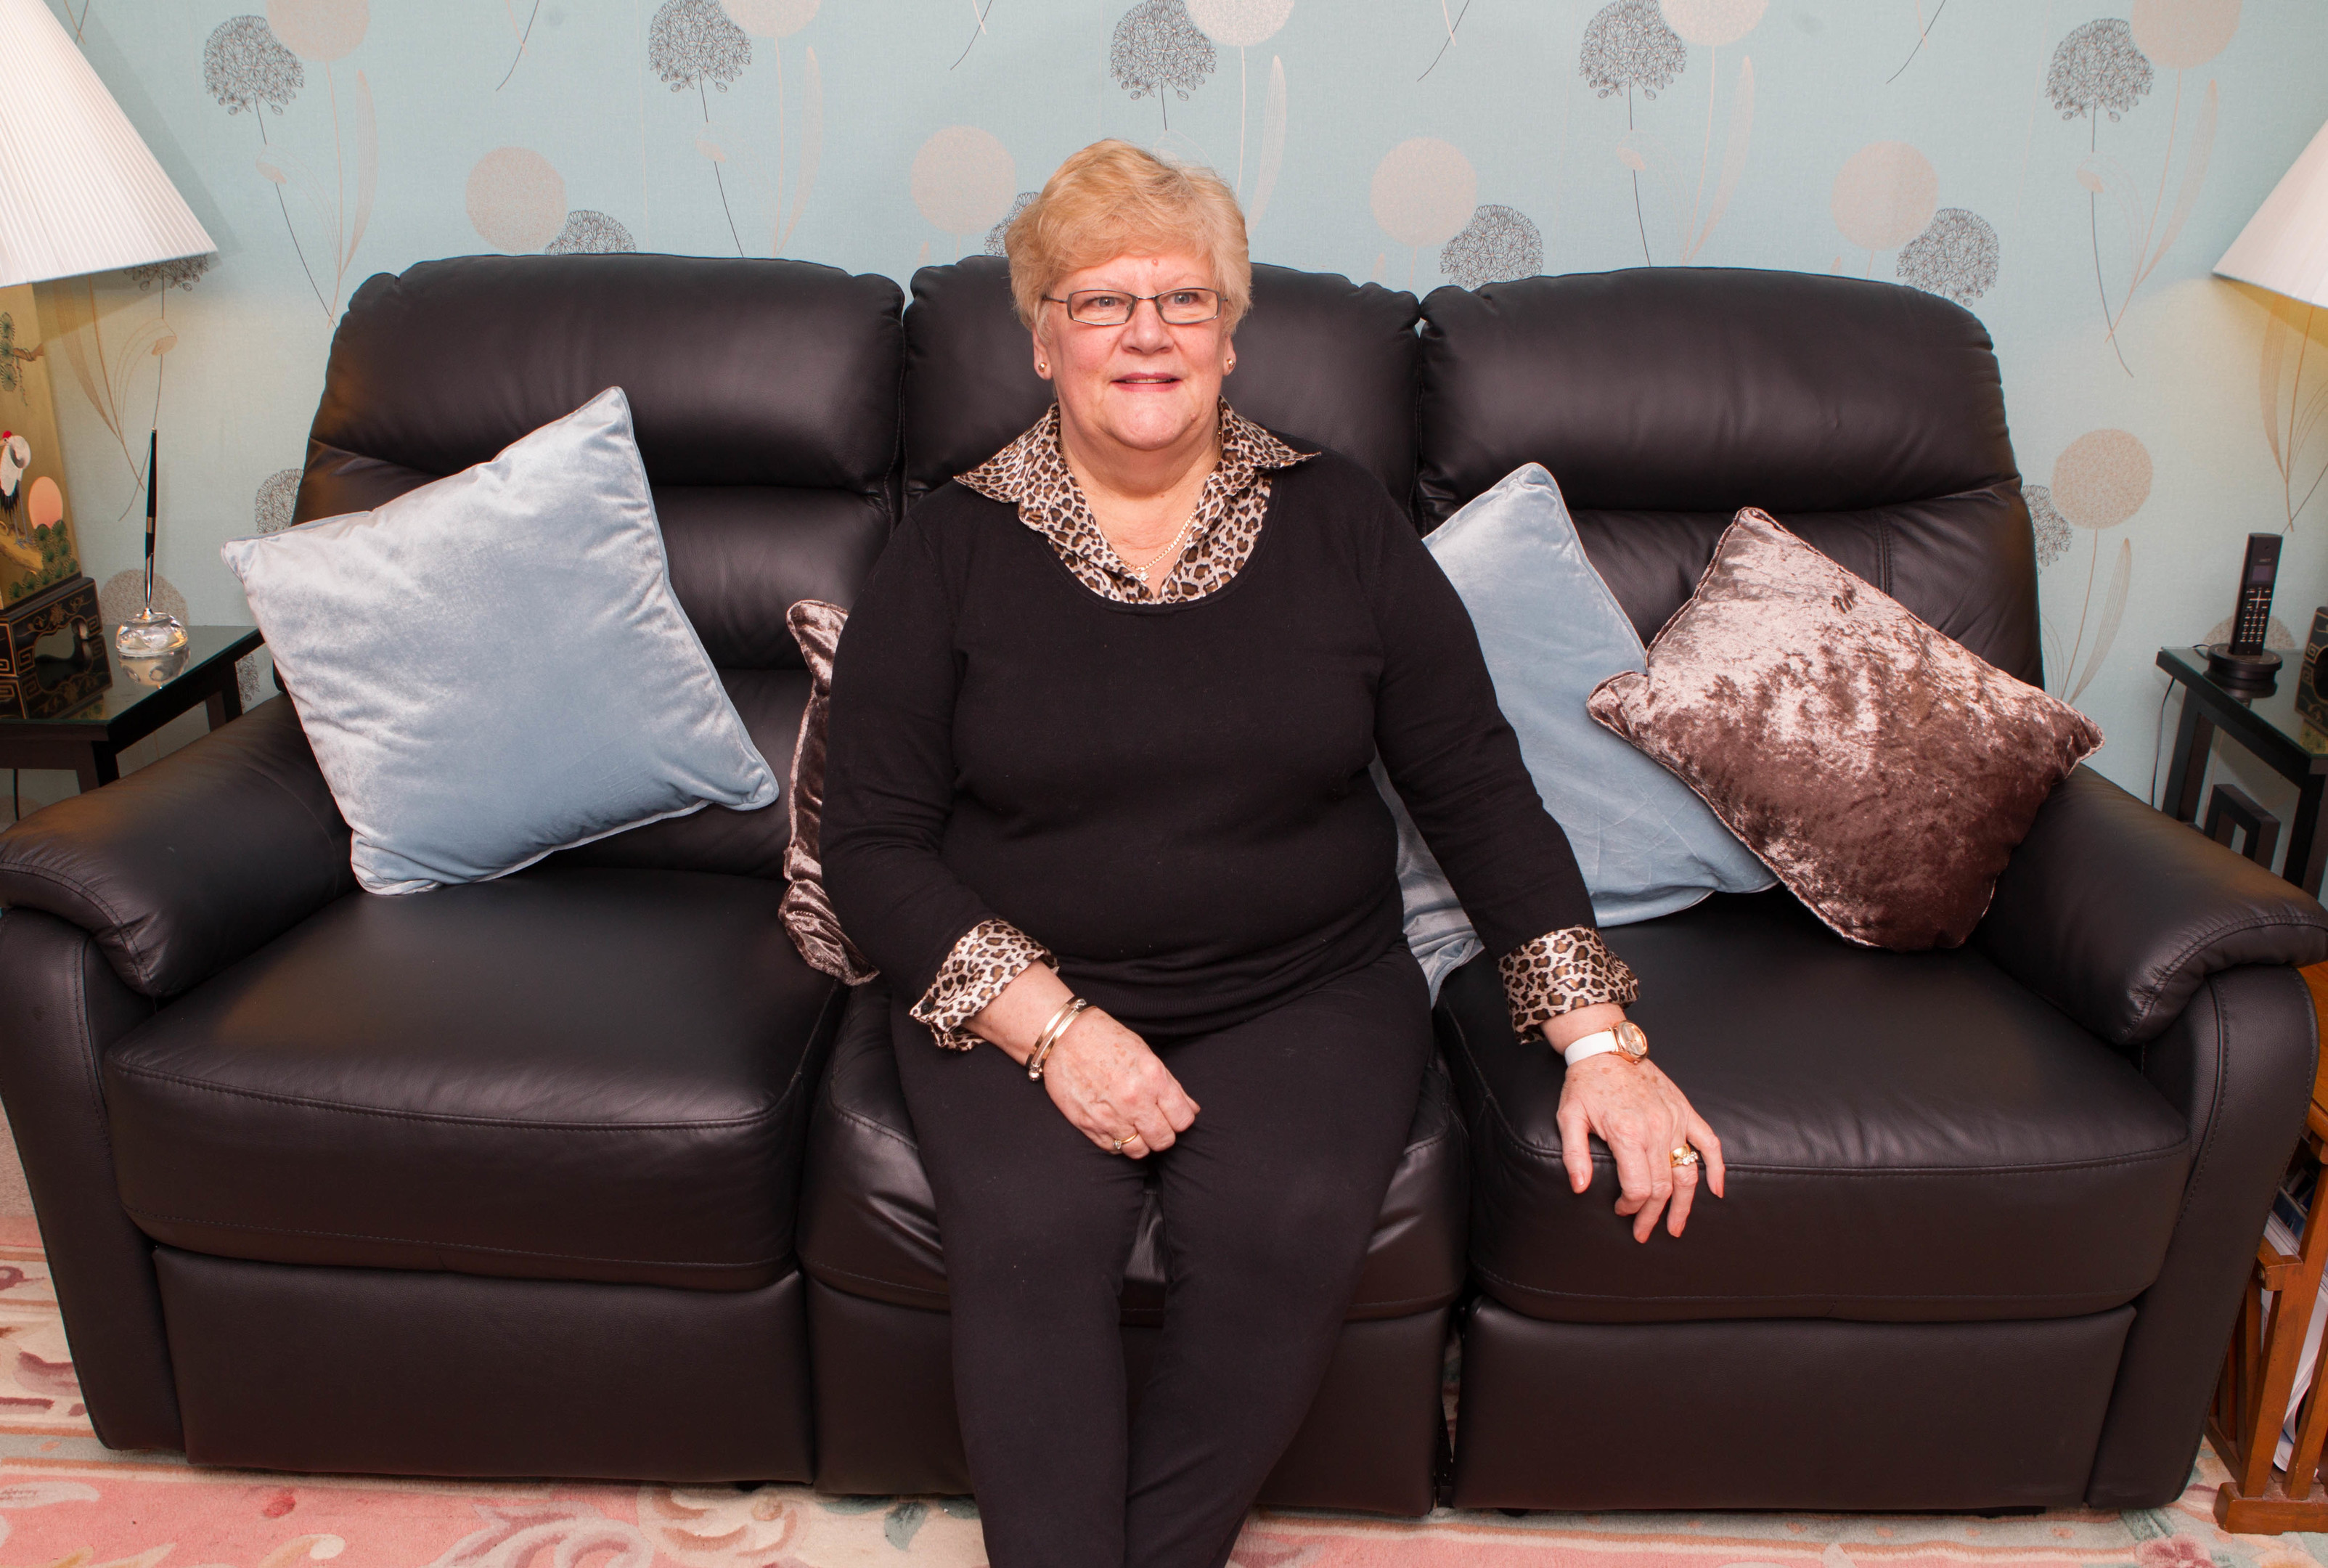 Janette Morrison with her new sofa thank to Raw Deal (Chris Austin / DC Thomson)